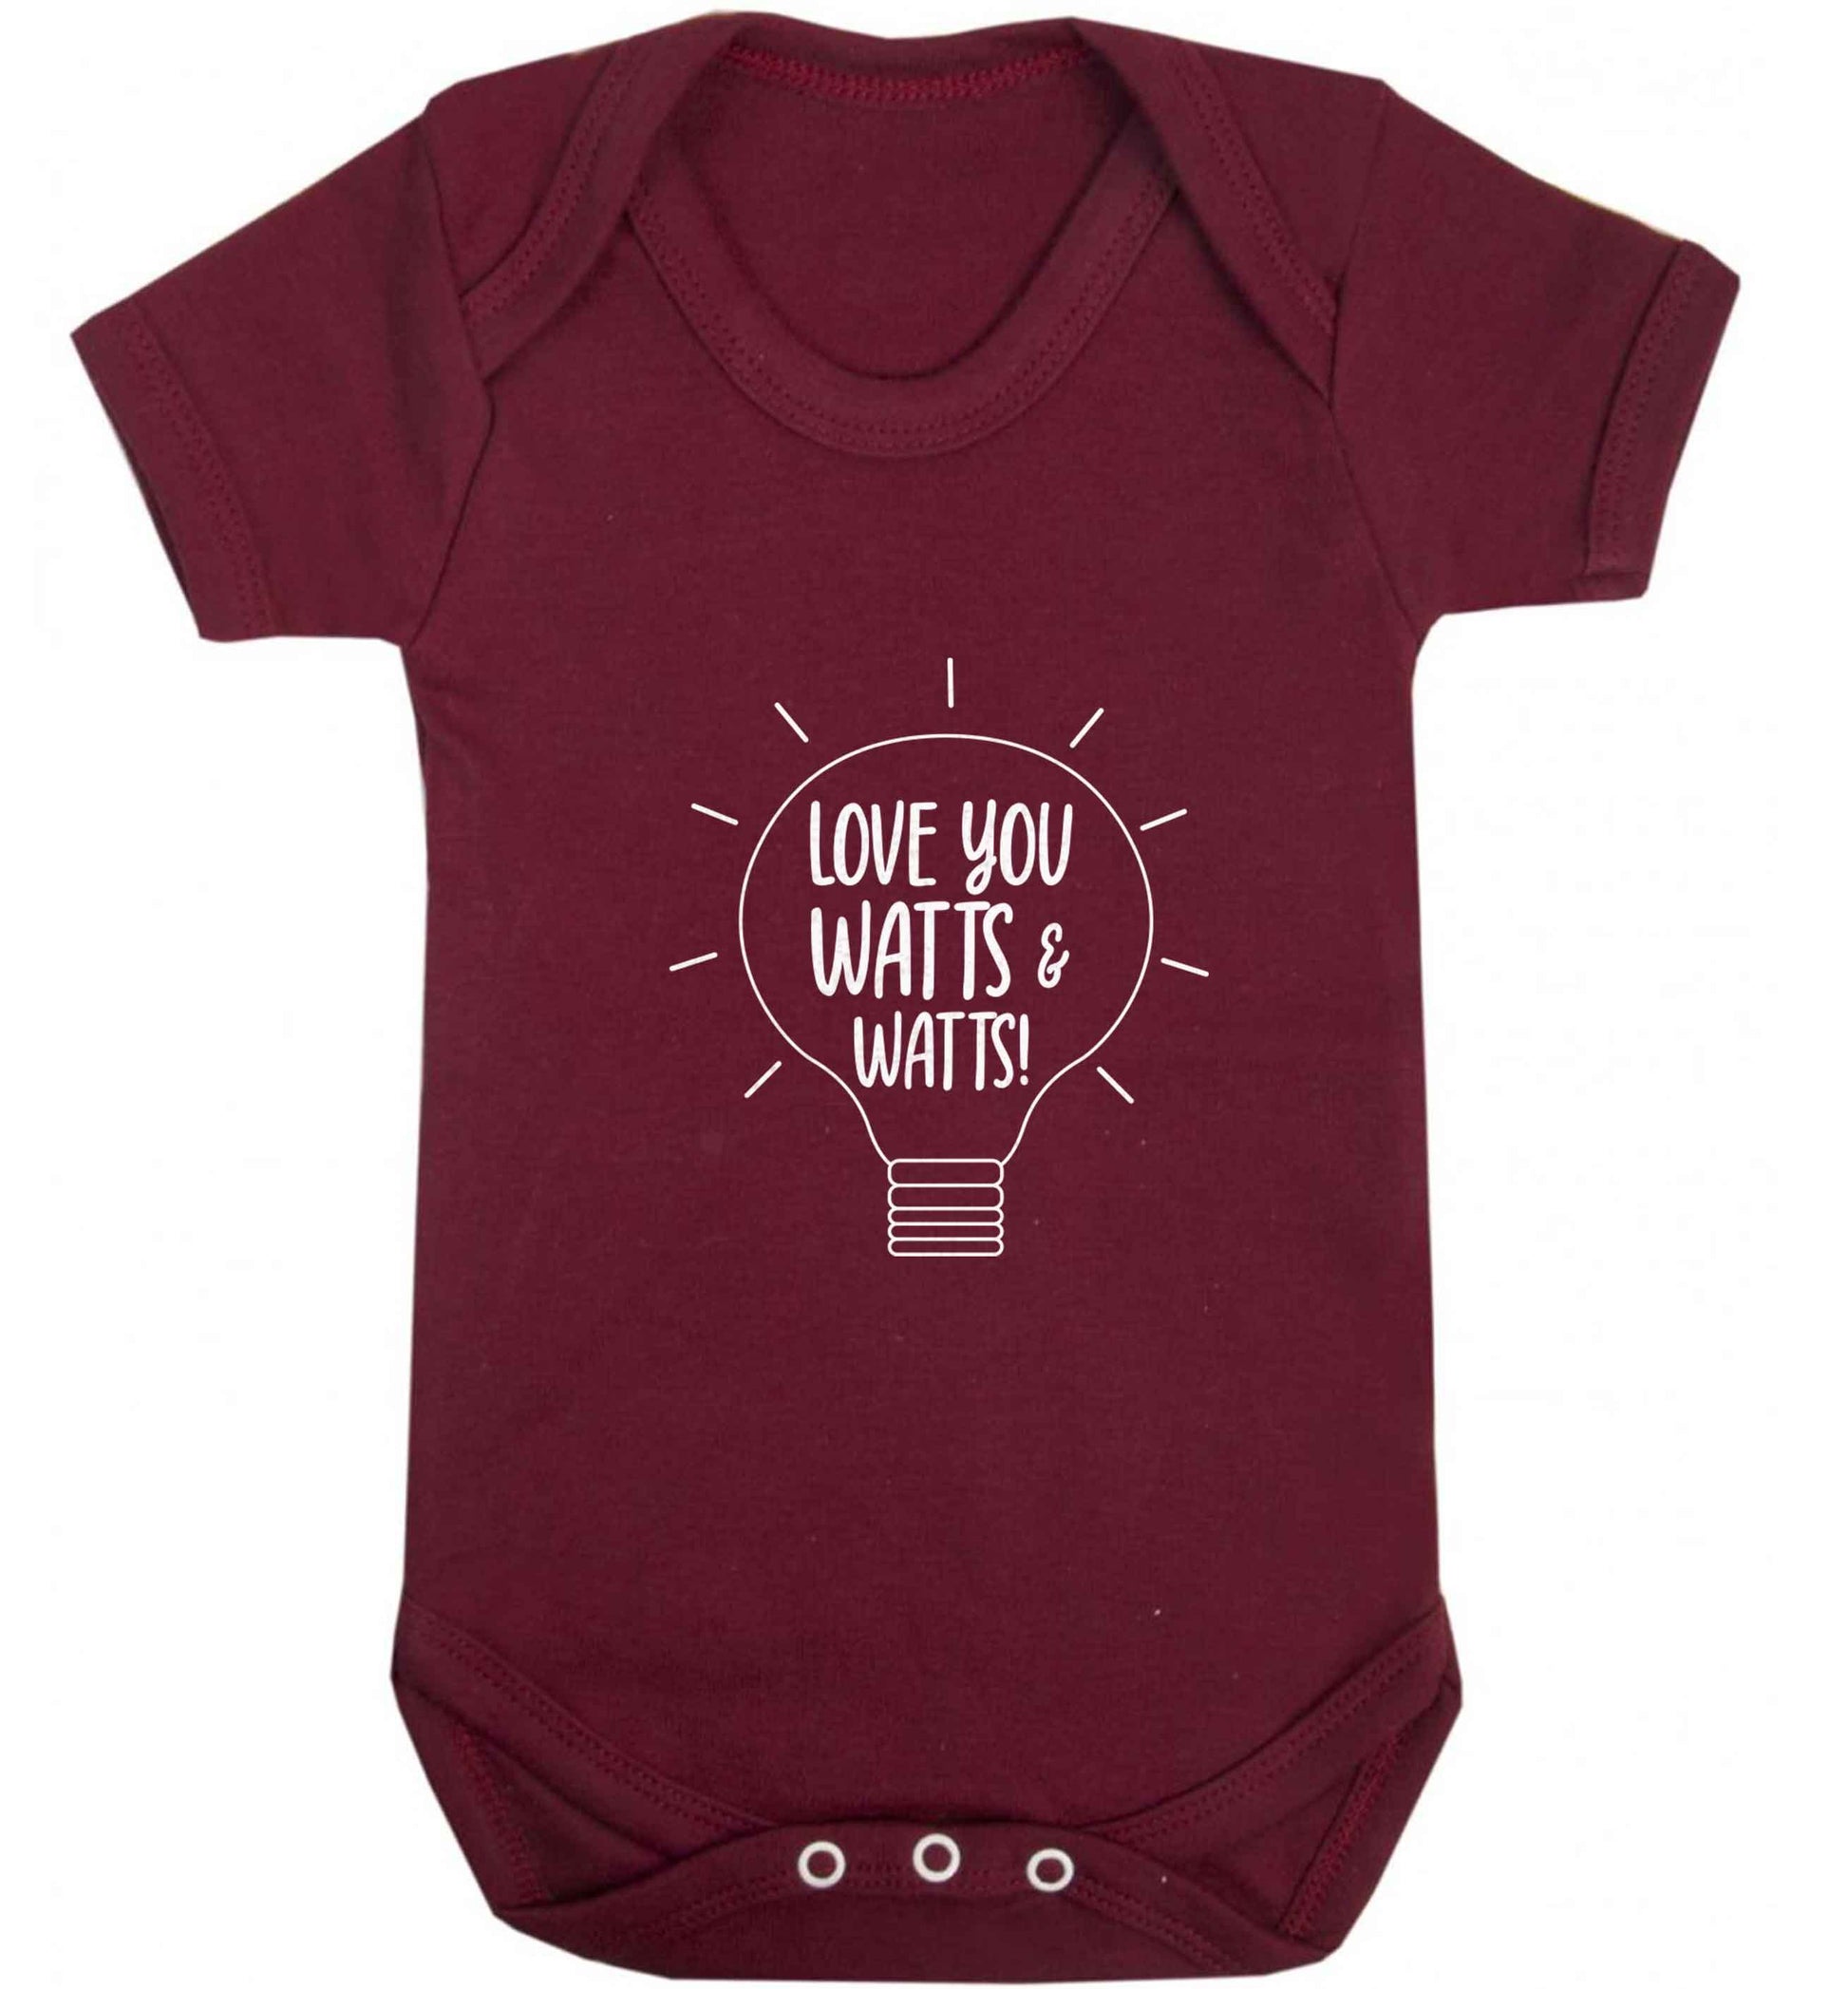 I love you watts and watts baby vest maroon 18-24 months